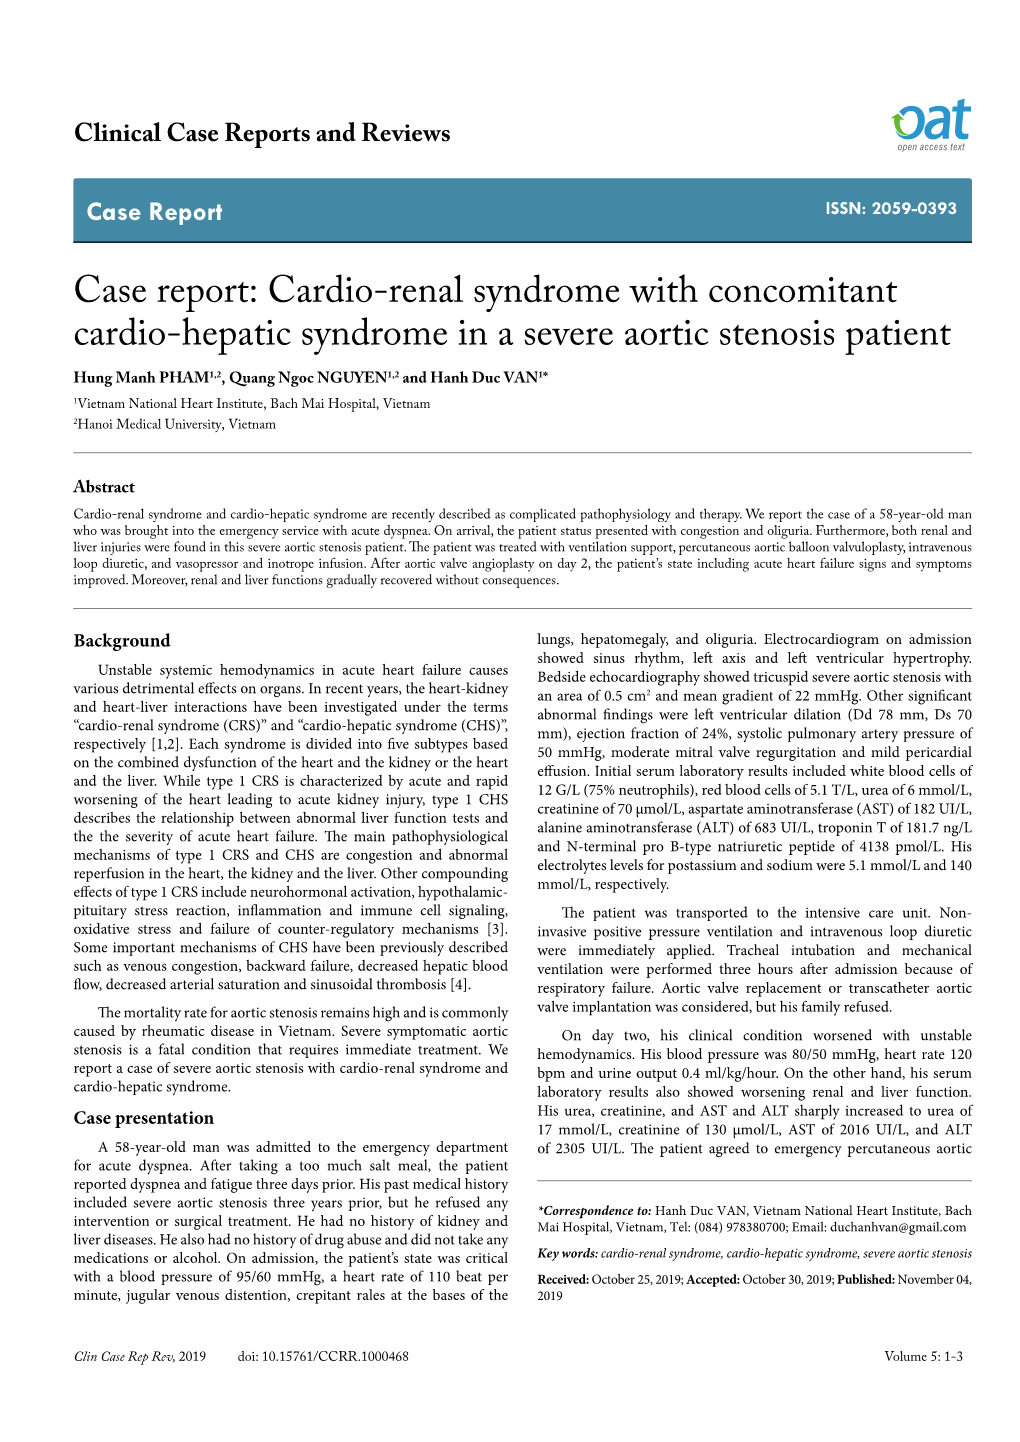 Case Report: Cardio-Renal Syndrome with Concomitant Cardio-Hepatic